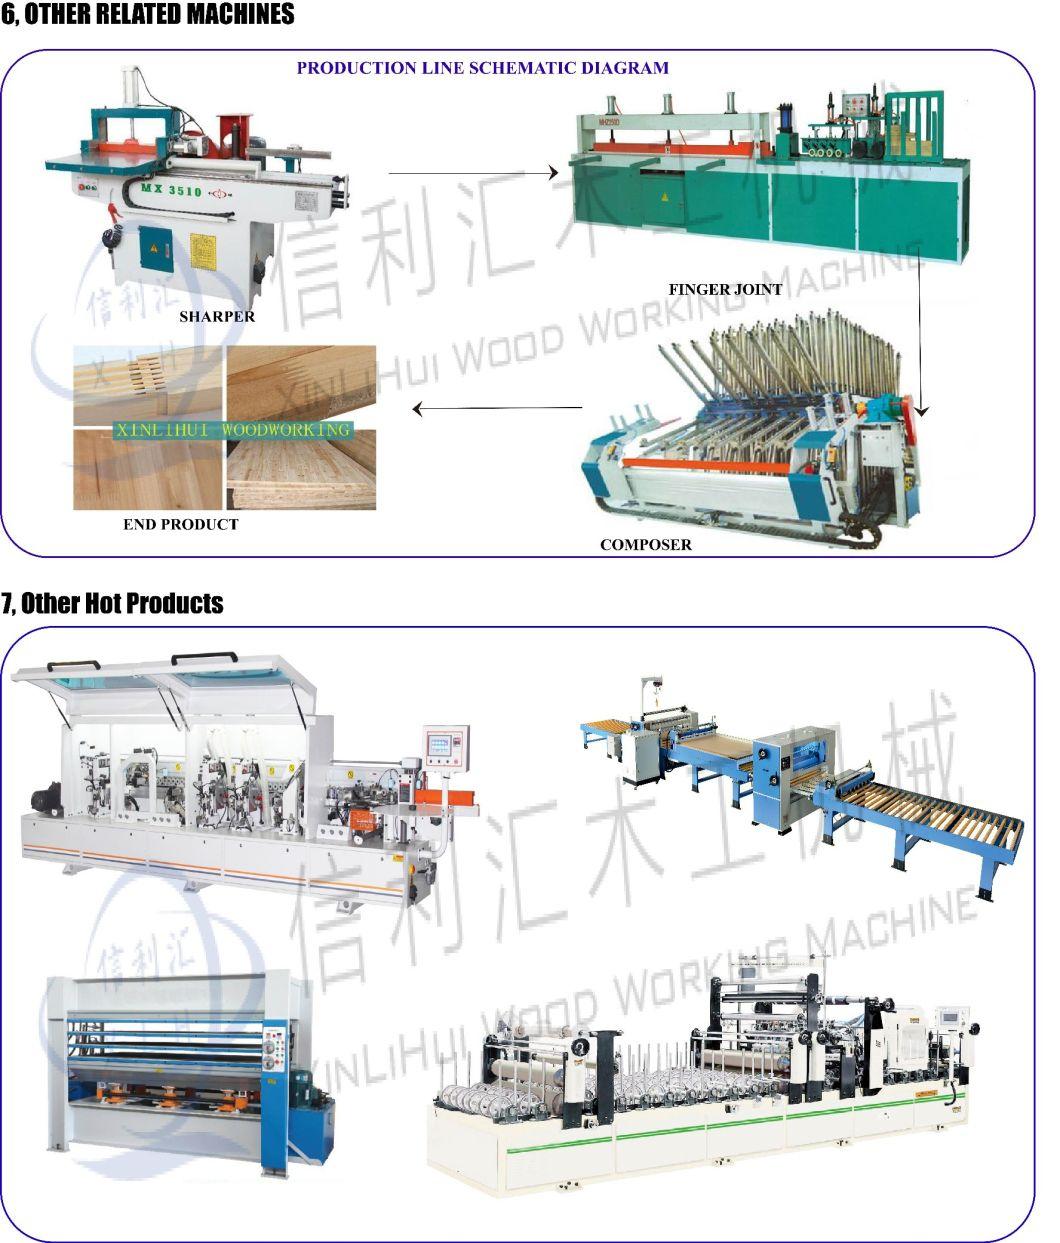 Woodworking Equipment Full Automatic Finger Jointing Line